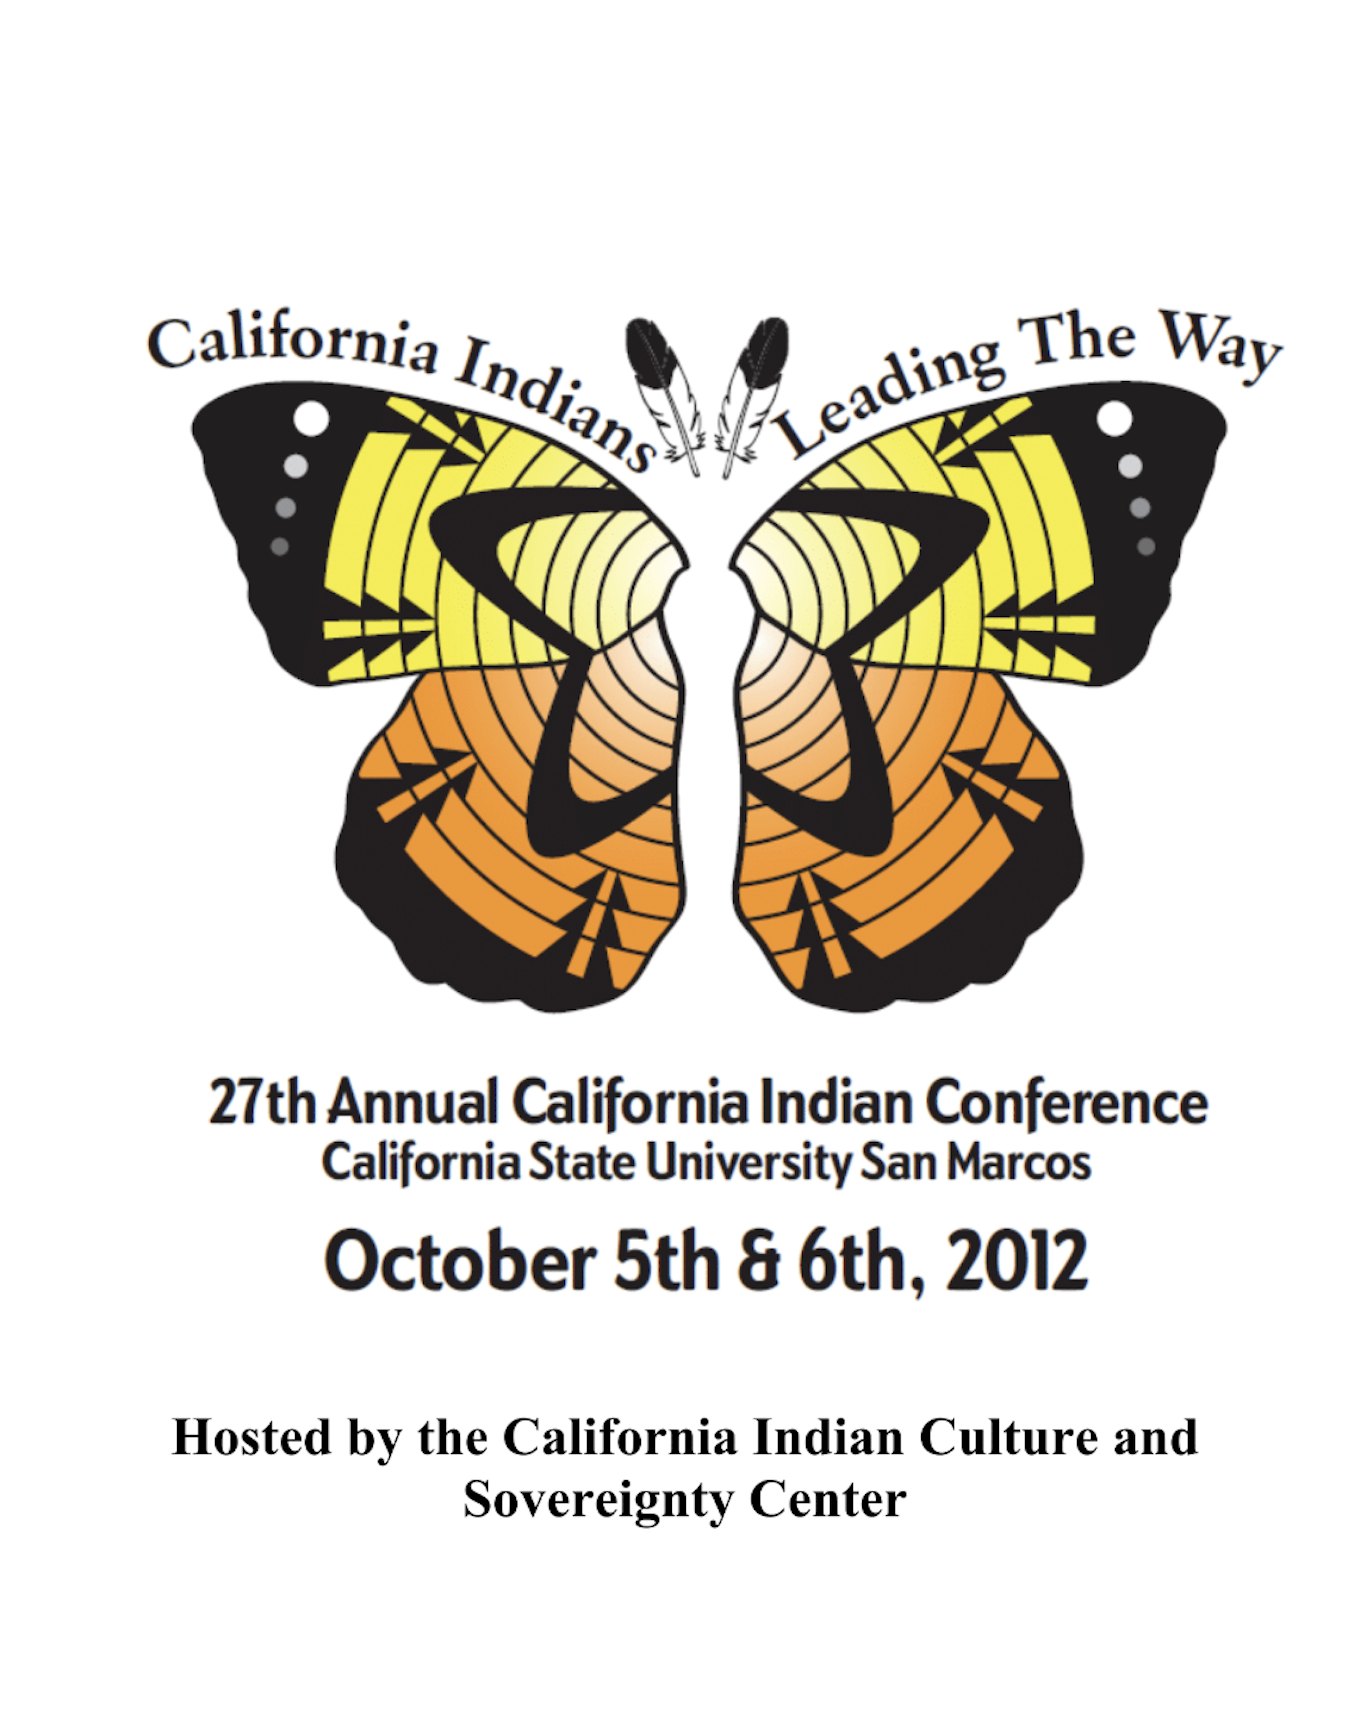 "California Indians Leading The Way, 27th Annual California Indian Conference, California State University San Marcos, October 5th & 6th, 2012 Hosted by the California Indian Culture and Sovereignty Center" Graphic of a yellow and orange butterfly in the upper half / center of the page